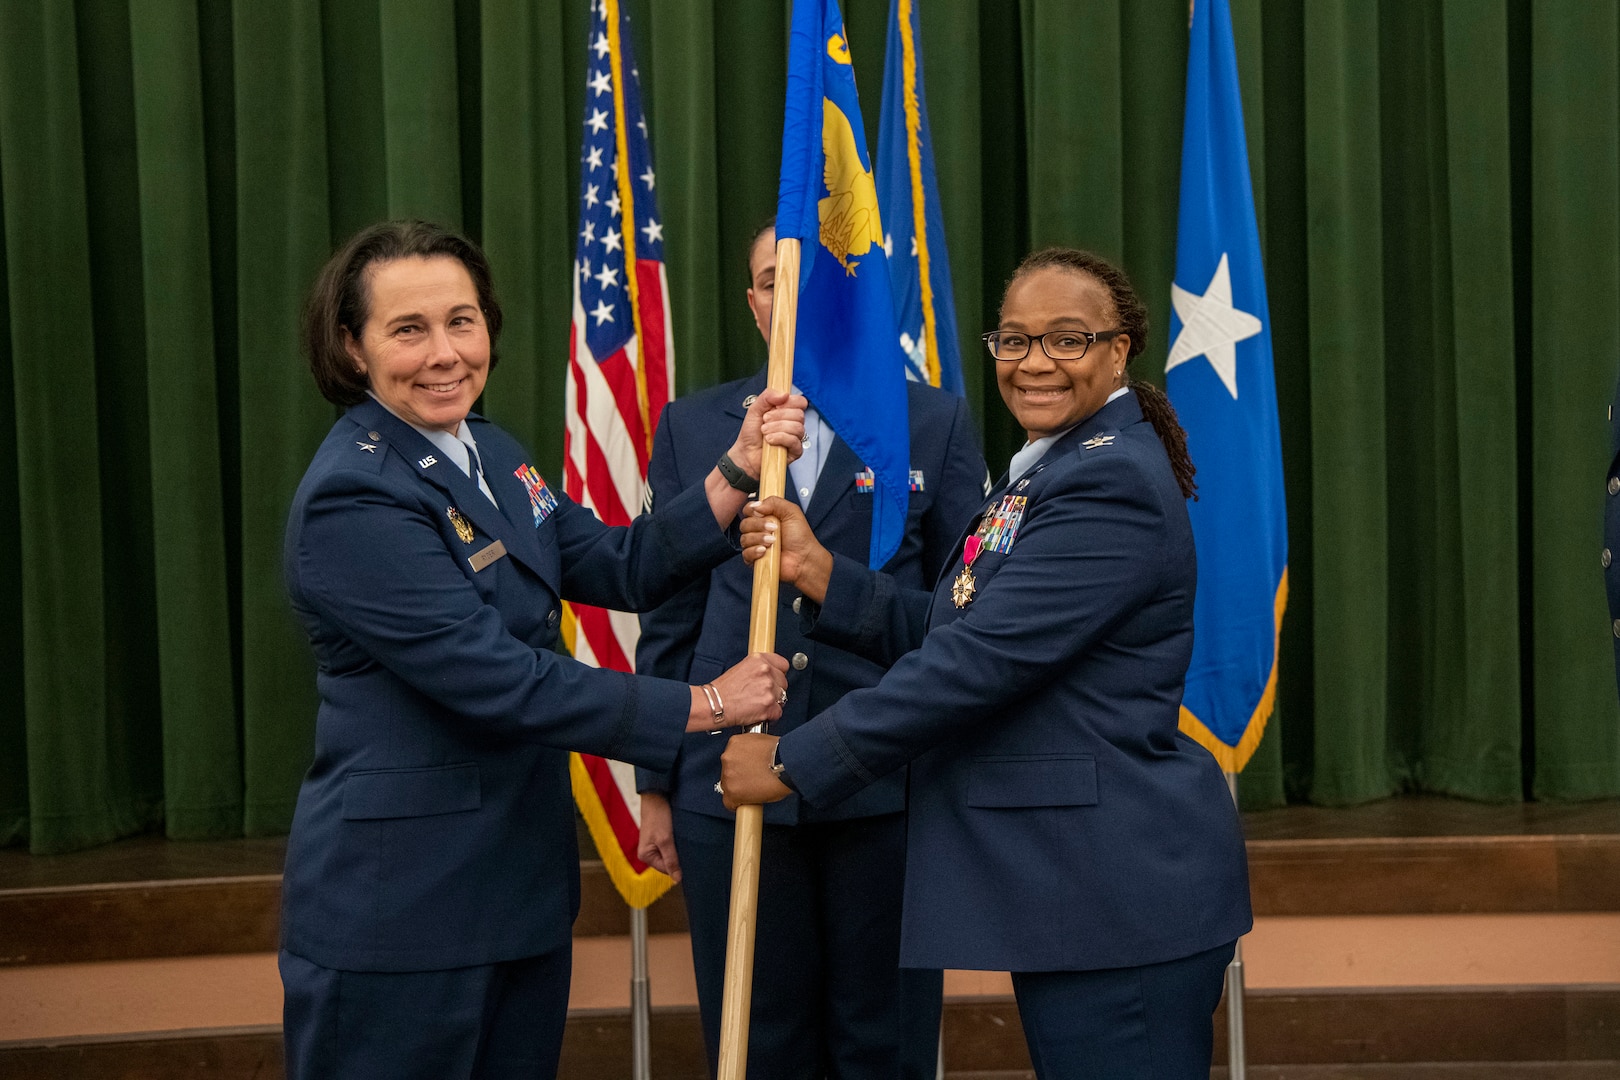 Air Force commanders pass flag